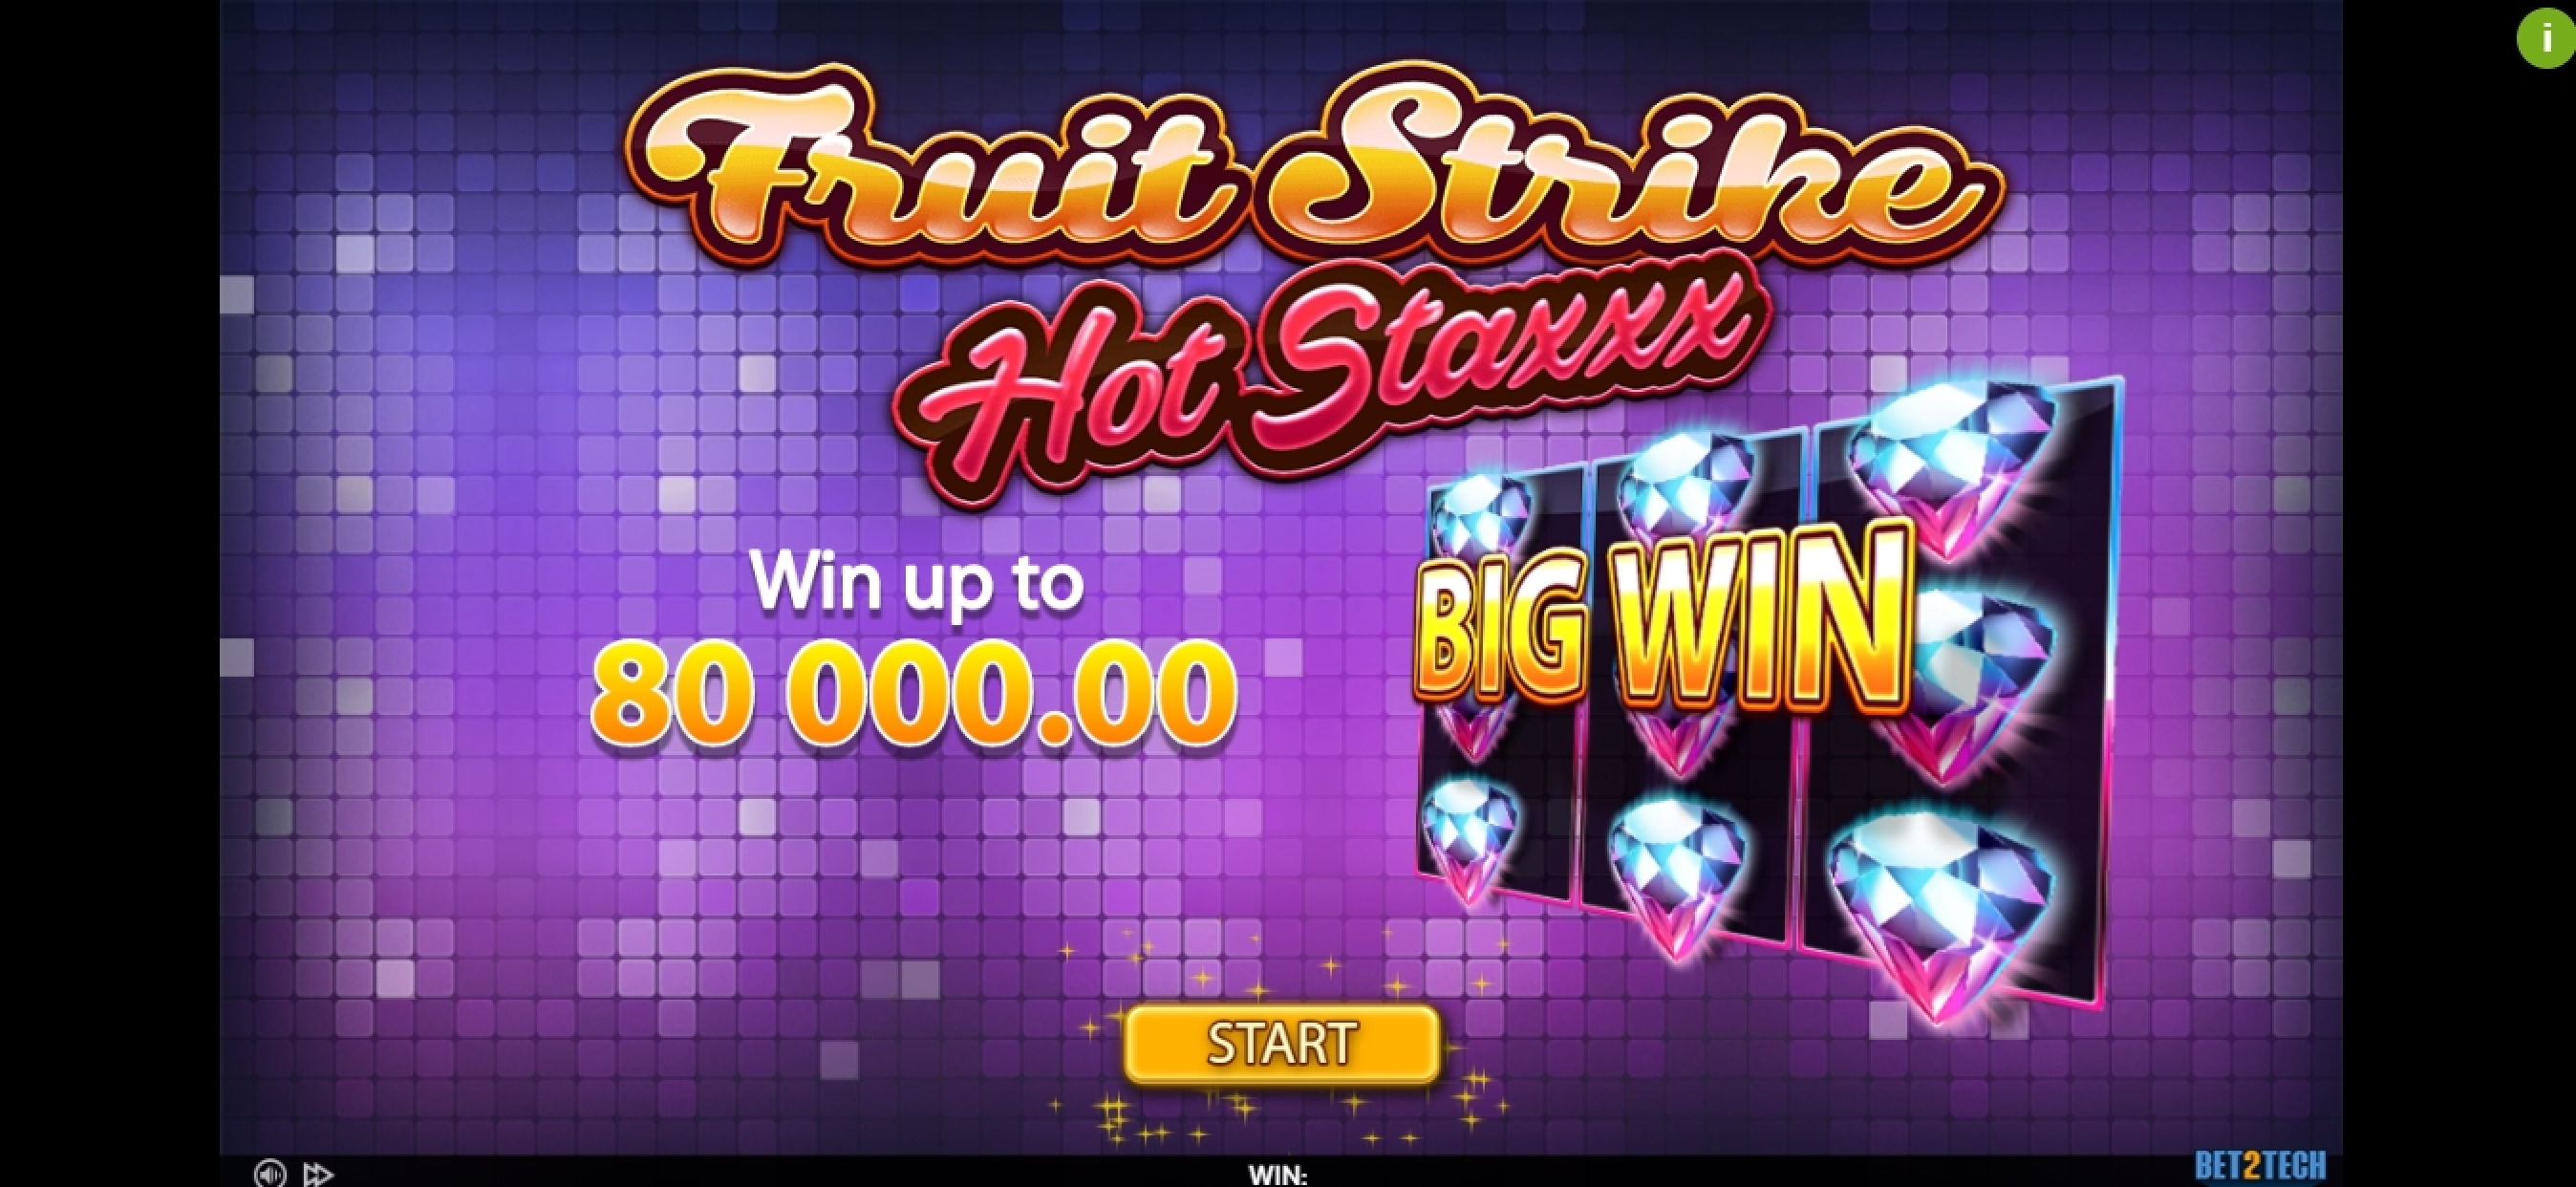 Play Fruit Strike: Hot Staxxx Free Casino Slot Game by Bet2Tech